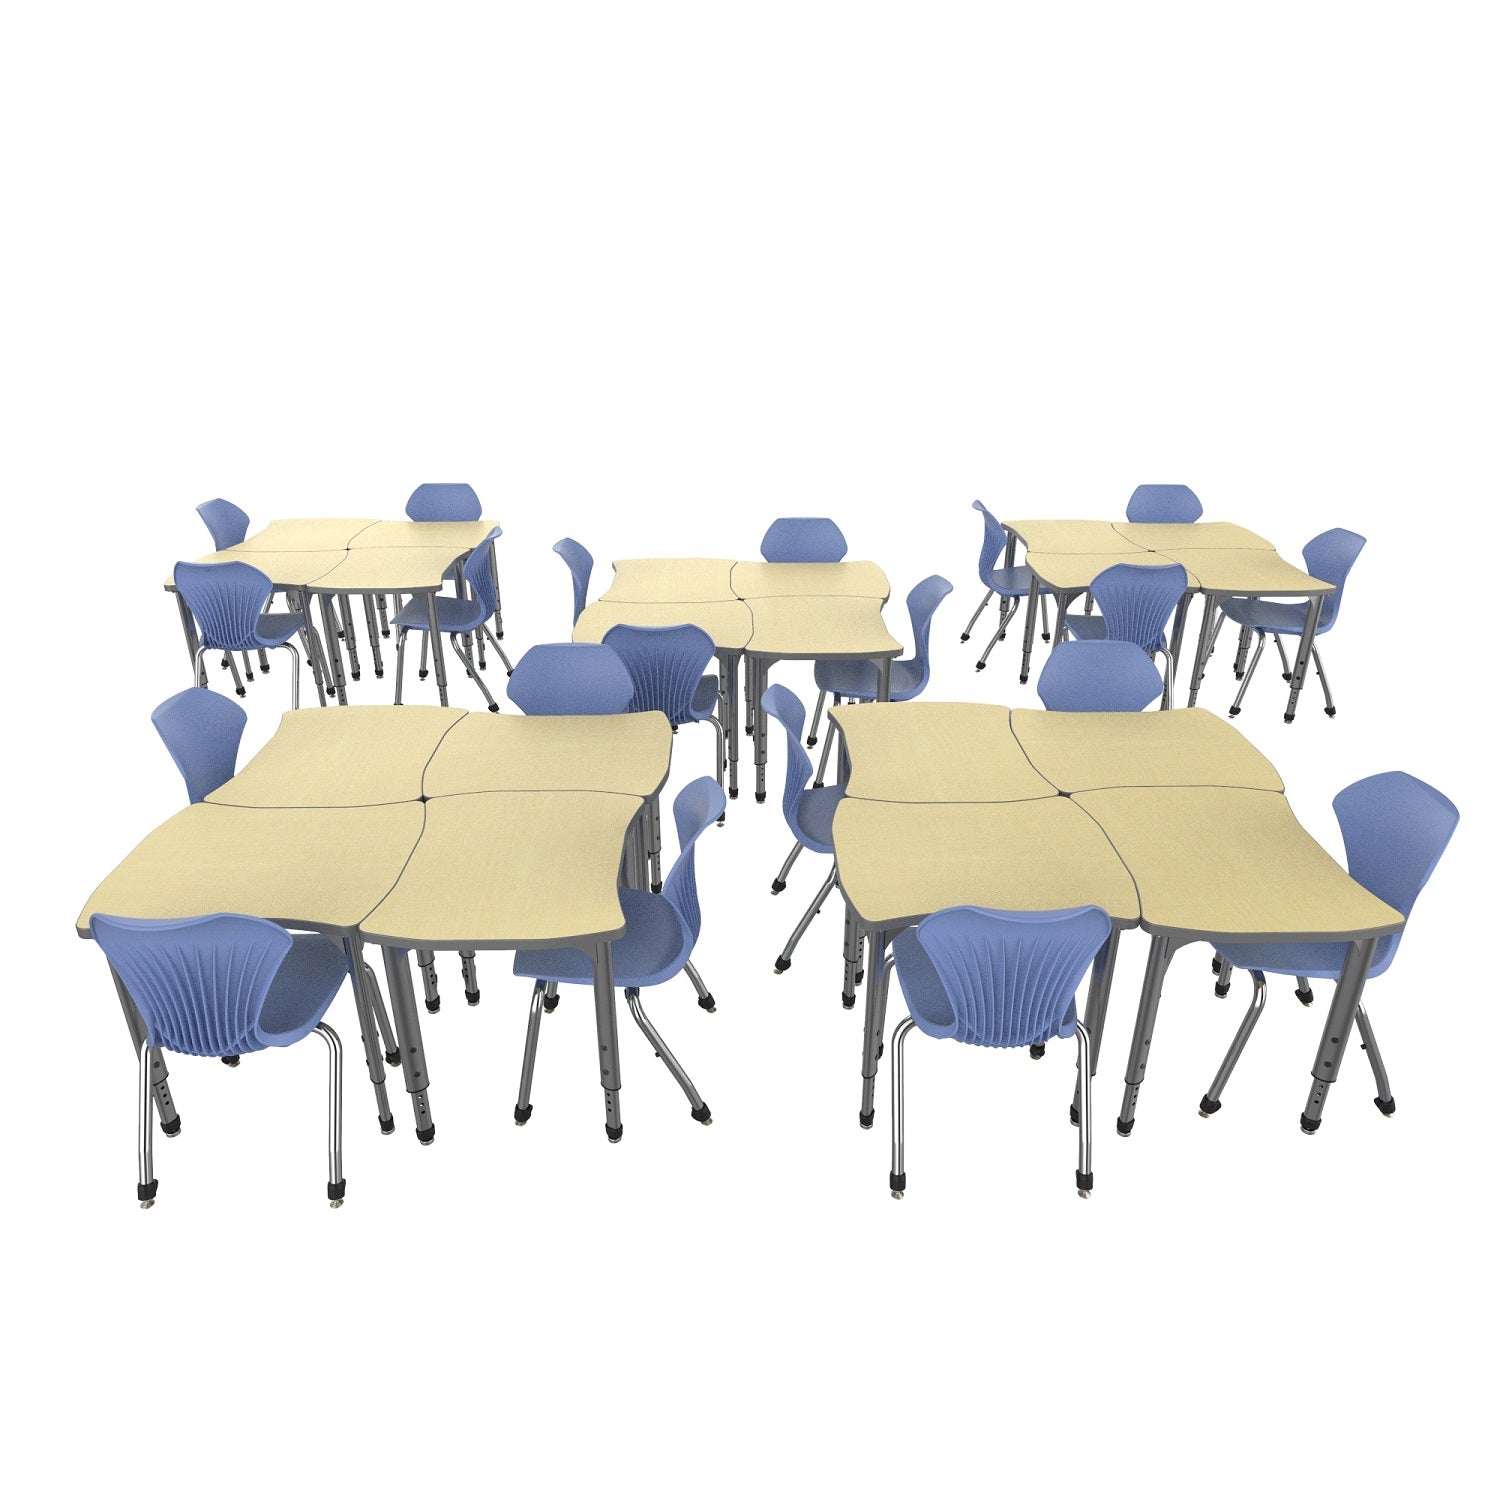 Apex Classroom Desk and Chair Package, 20 Dog Bone Collaborative Student Desks with 20 Apex Stack Chairs